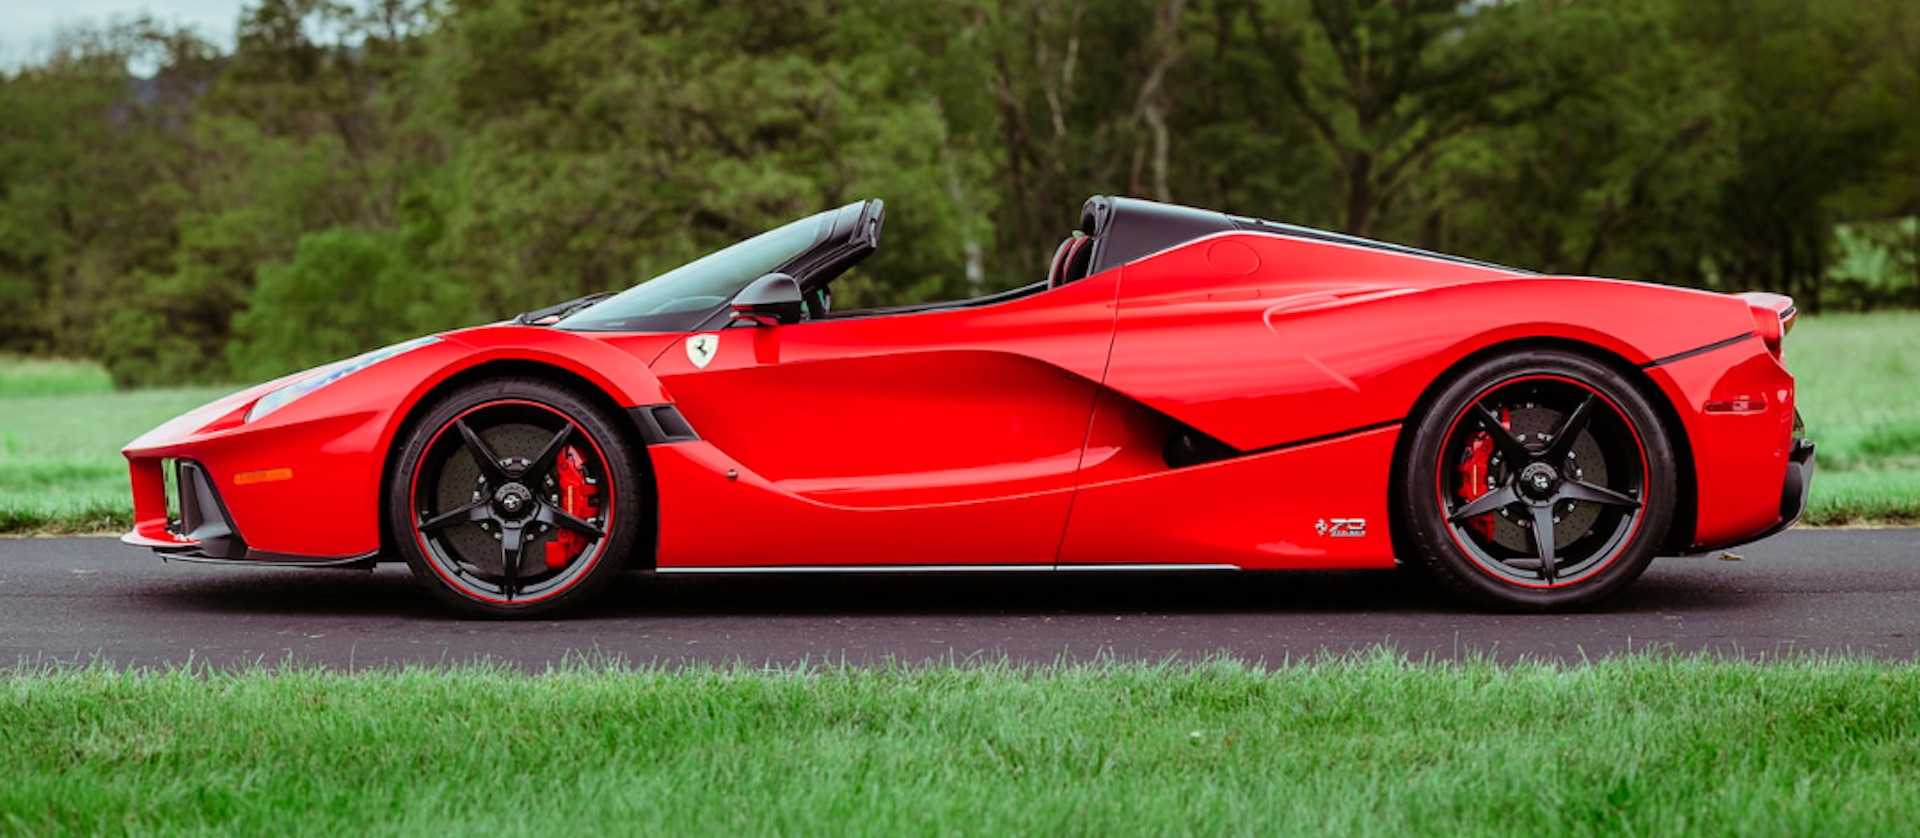 2016 Ferrari LaFerrari Aperta for sale after failing to sell at auction